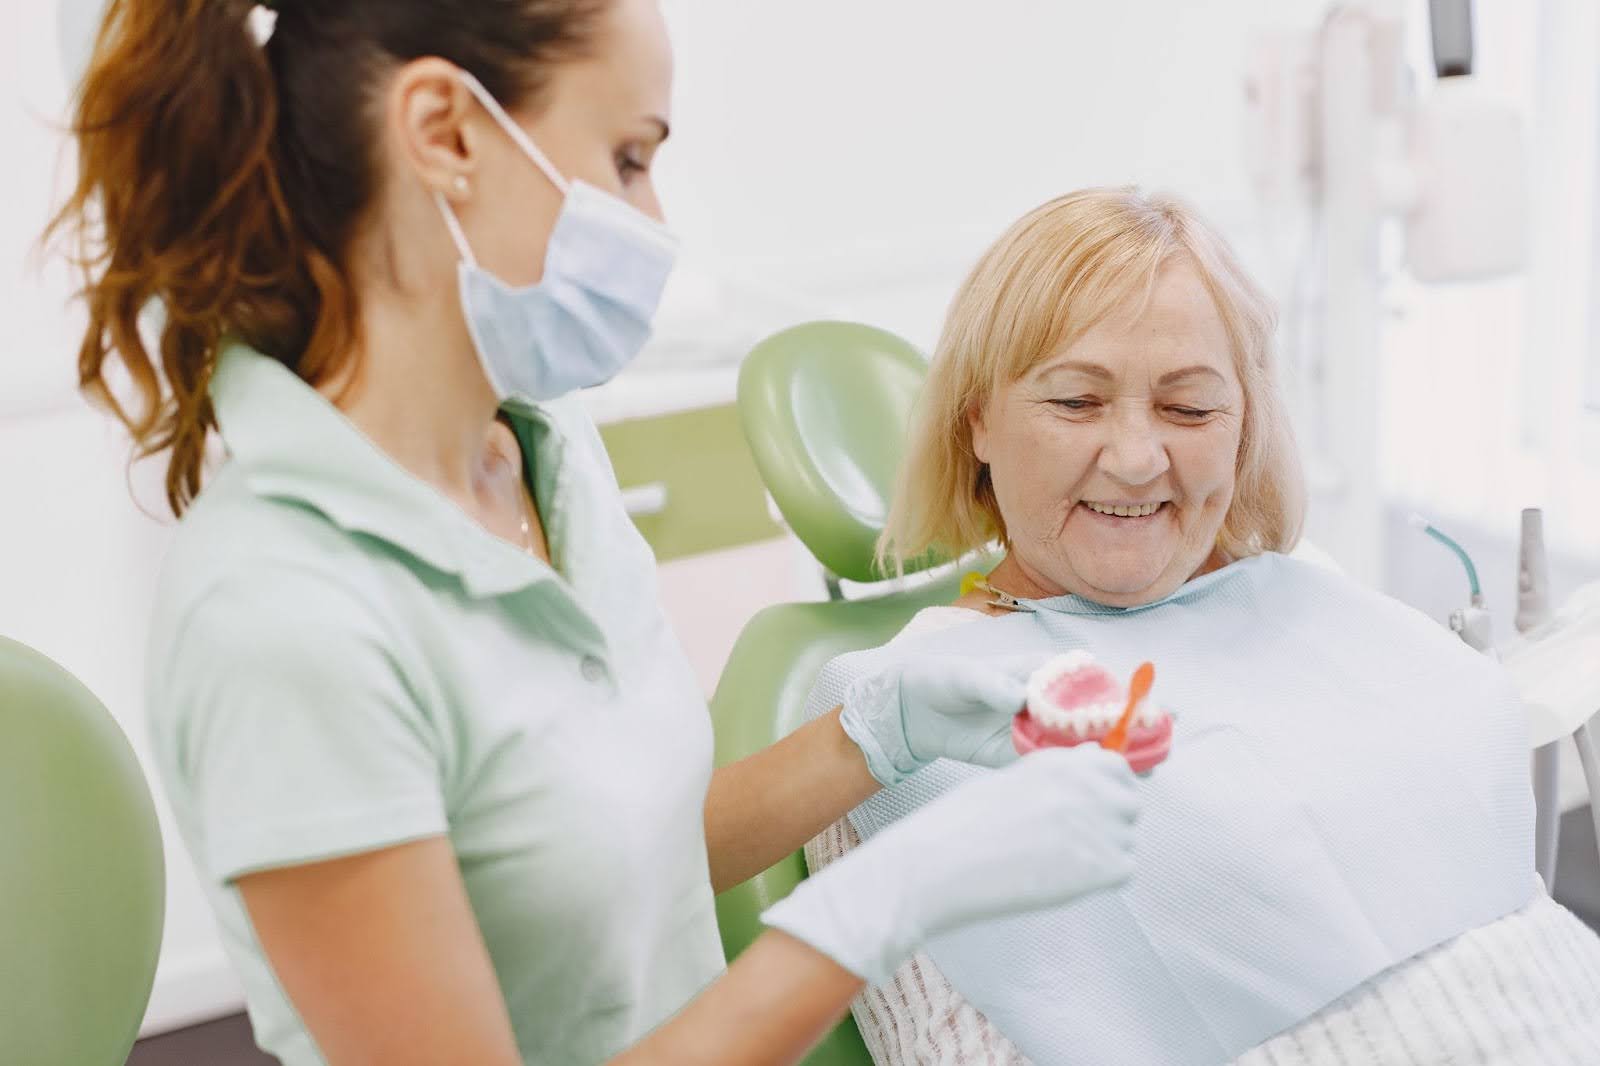 Maintaining and caring for All-On-4 implants involves daily oral hygiene practices similar to natural teeth, including brushing twice daily and flossing.